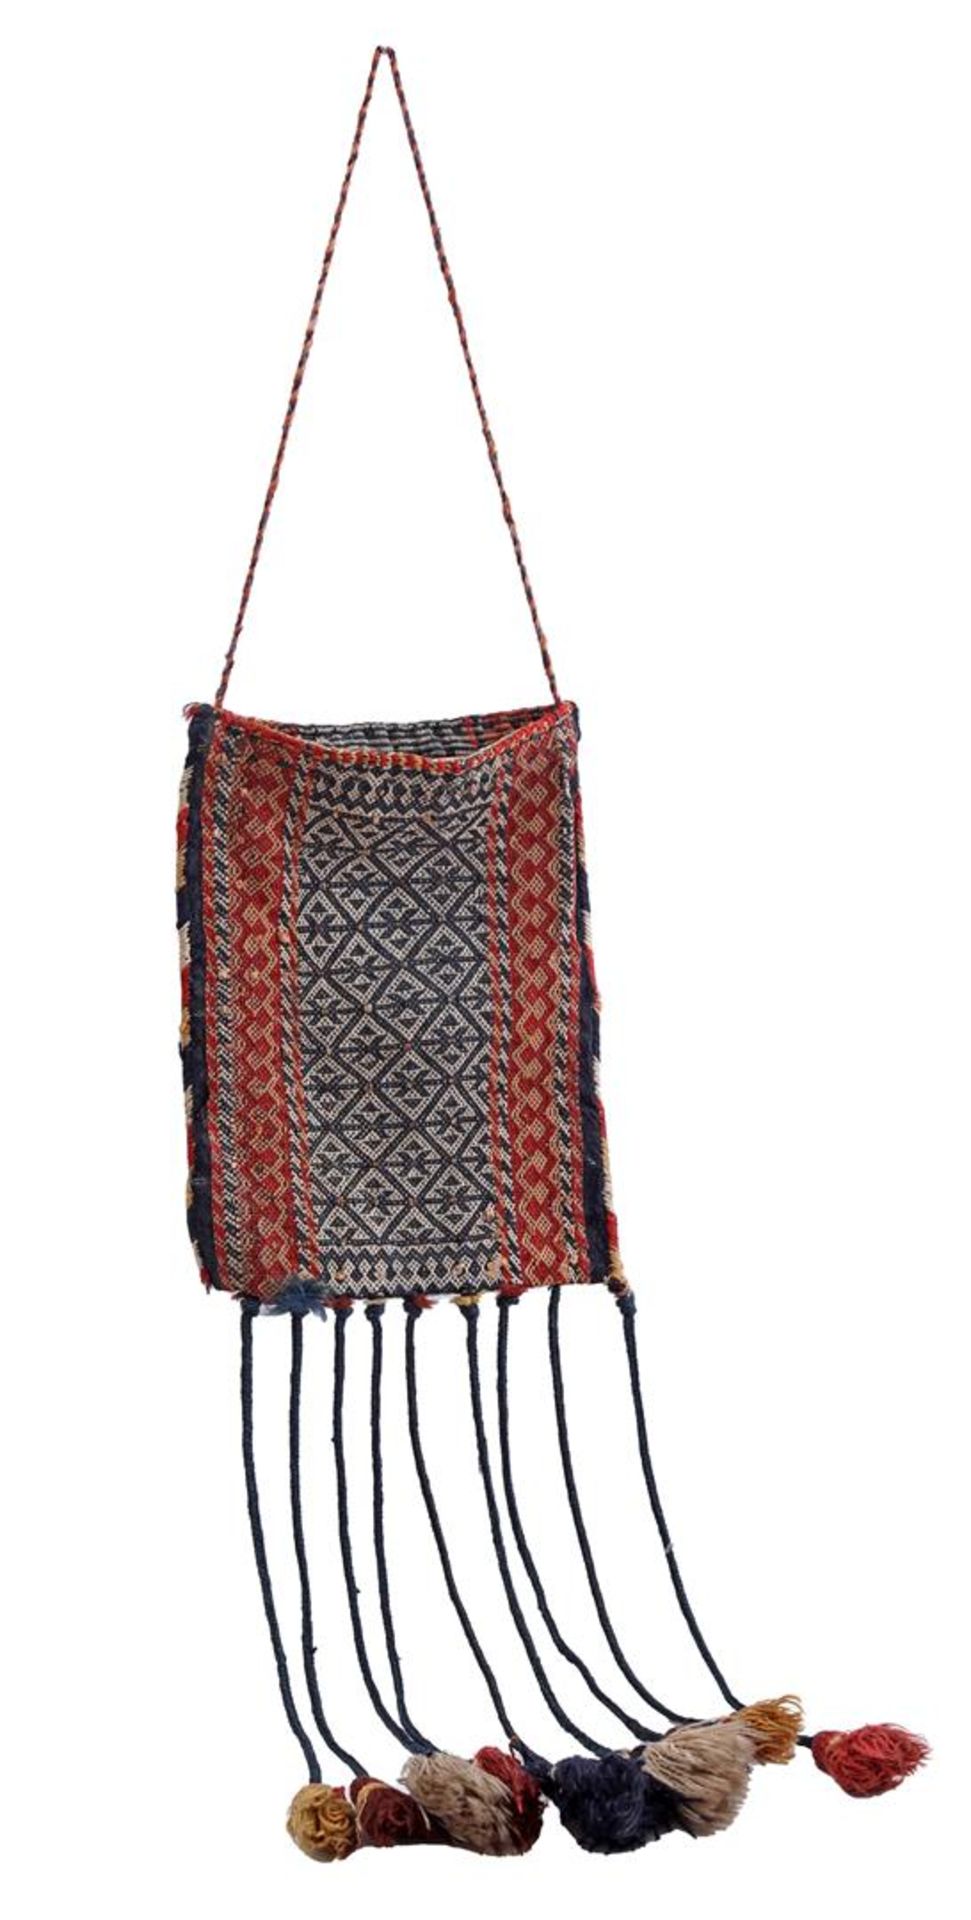 Hand-knotted oriental bag